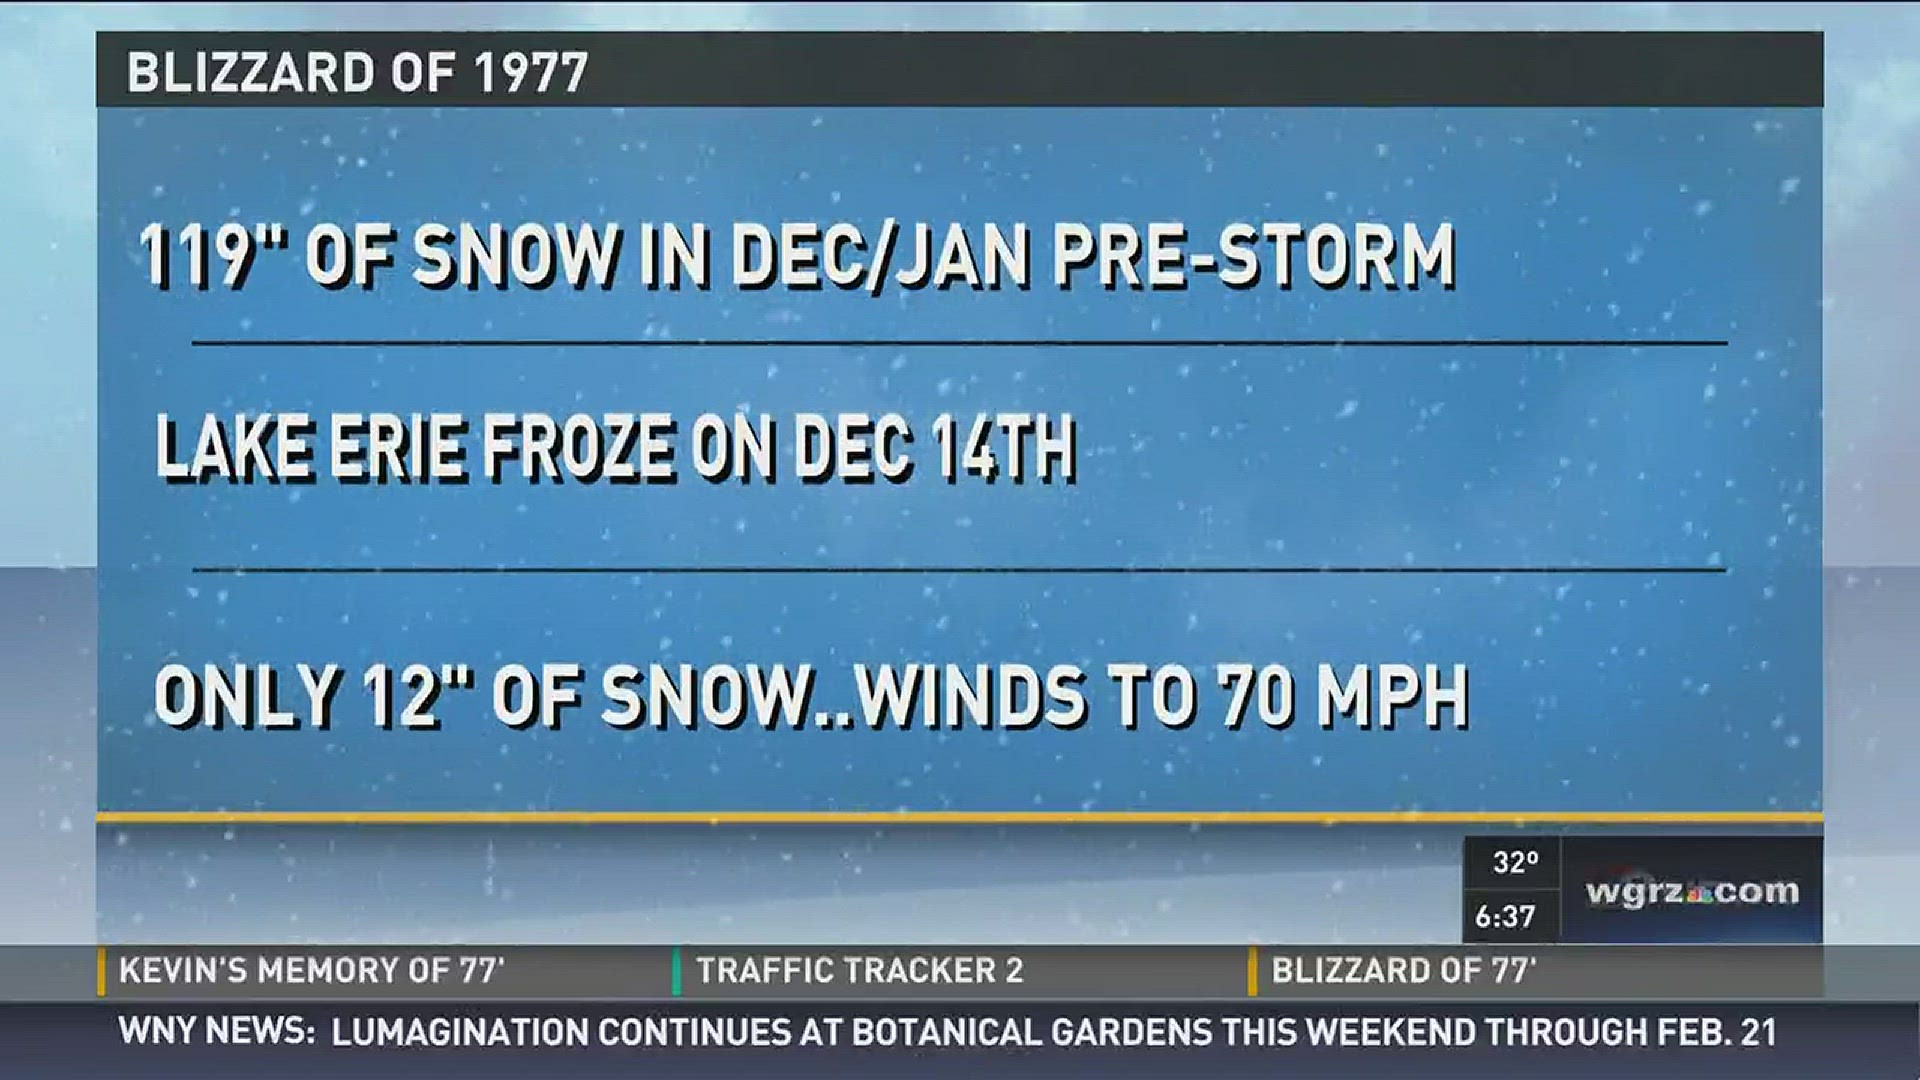 2017 marks the 40th Anniversary of the Blizzard of '77. Daybreak begins taking a look back to that fateful storm. Patrick Hammer breaks down some of the weather numbers from the blizzard.